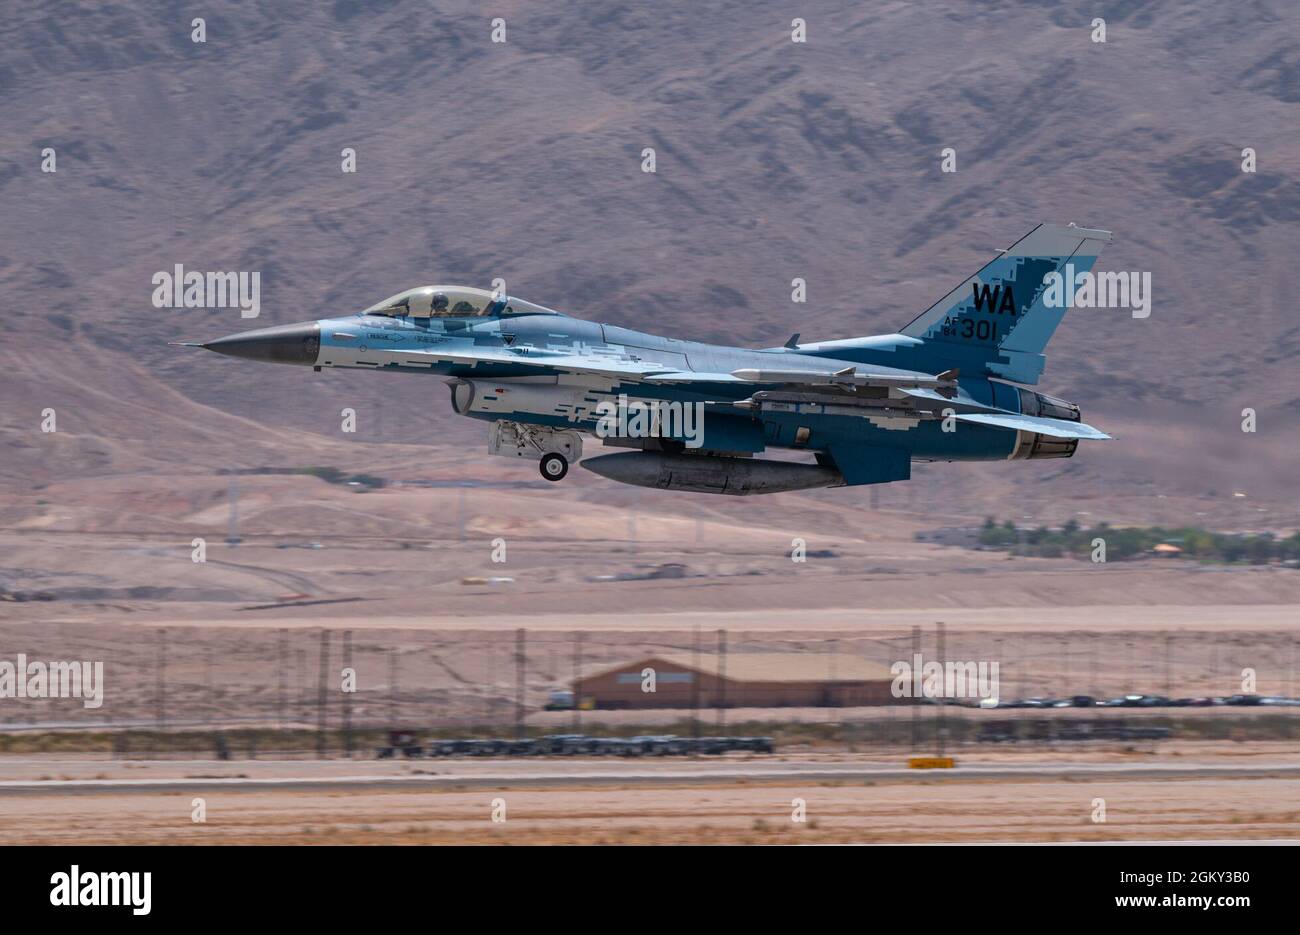 An F-16C Falcon fighter jet assigned to the 64th Aggressor Squadron, takes-off for a Red Flag 21-3 mission, at Nellis Air Force Base, Nevada, July 23, 2021. The Aggressor’s primary mission is to prepare the combat air forces, joint, and allied aircrews with realistic and challenging threat replication, training and feedback. Stock Photo